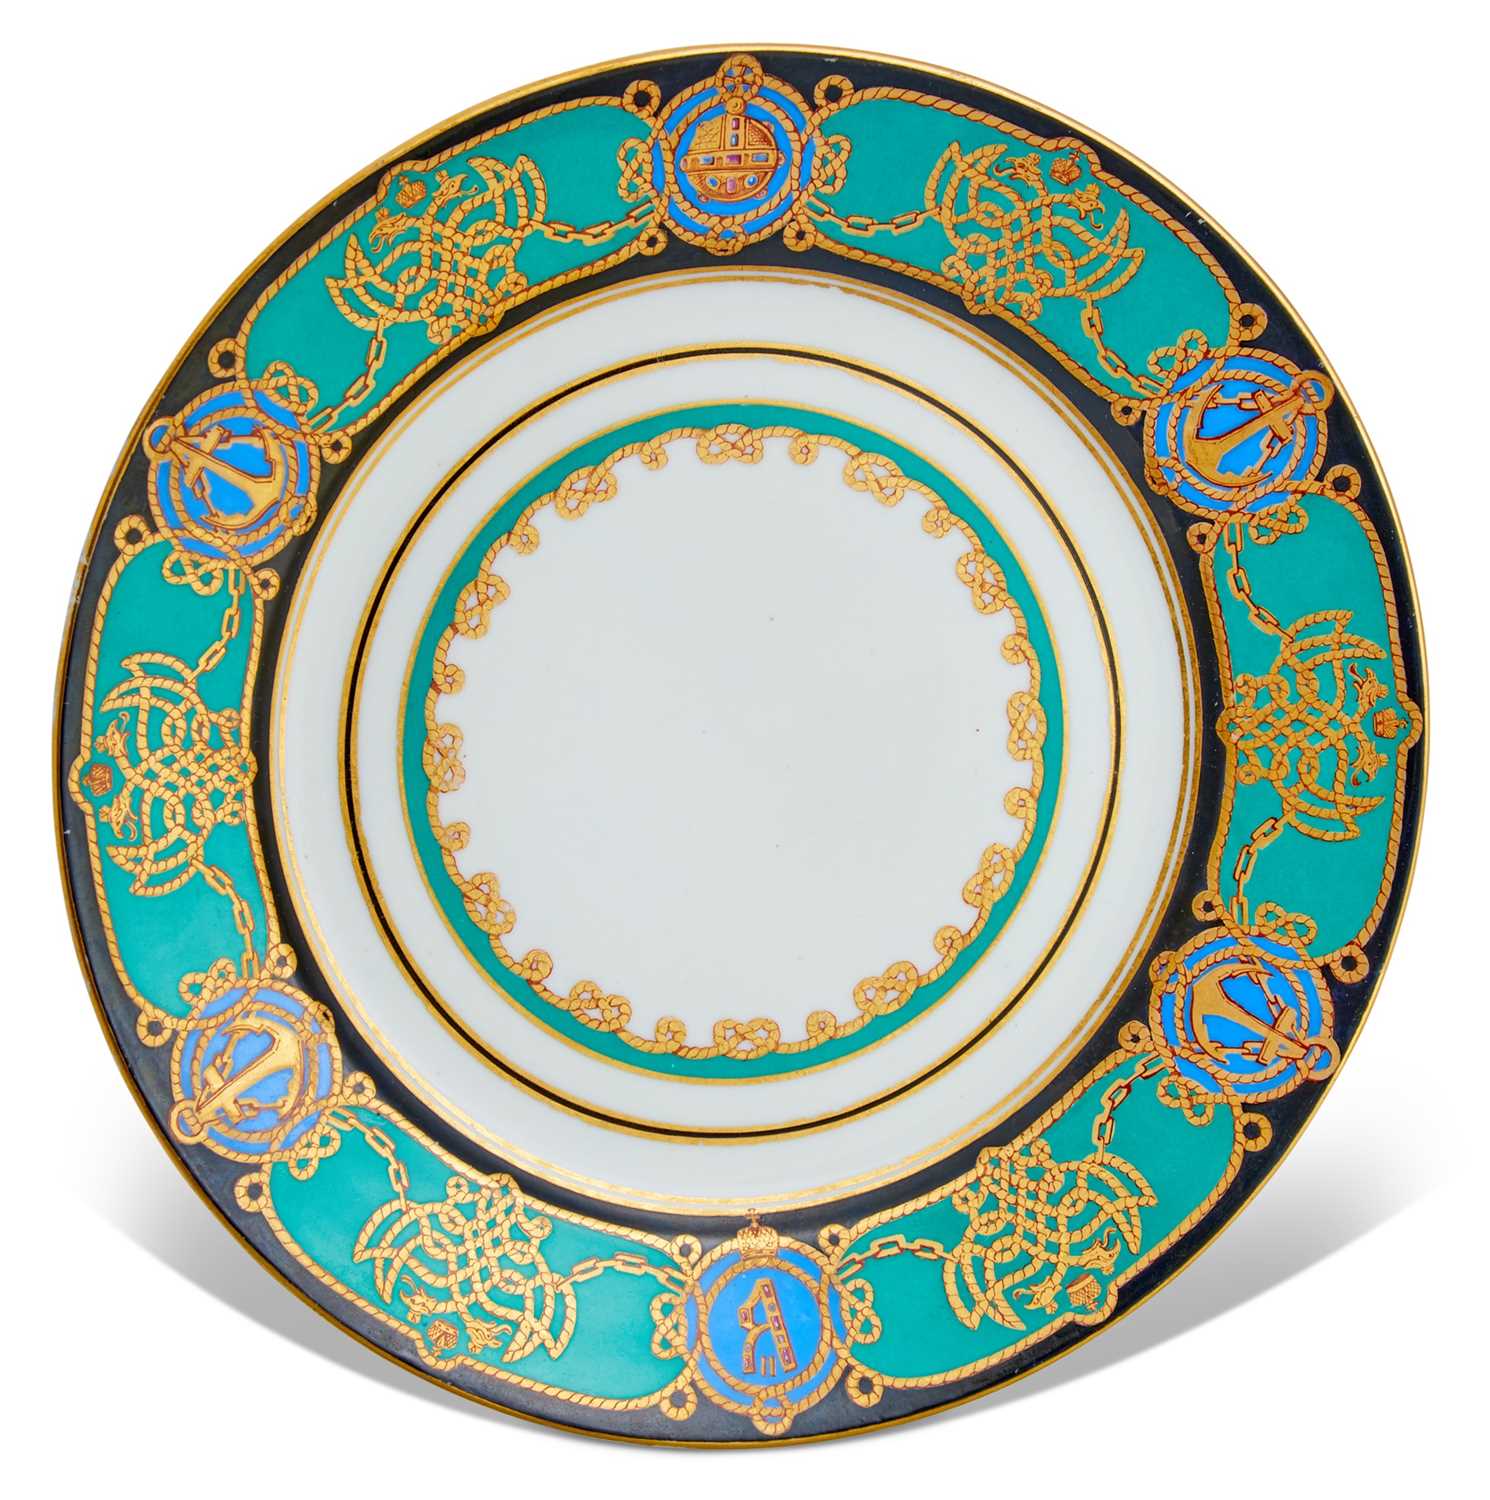 Lot 672 - Russian Porcelain Plate from the Imperial Yacht Derzhava Service